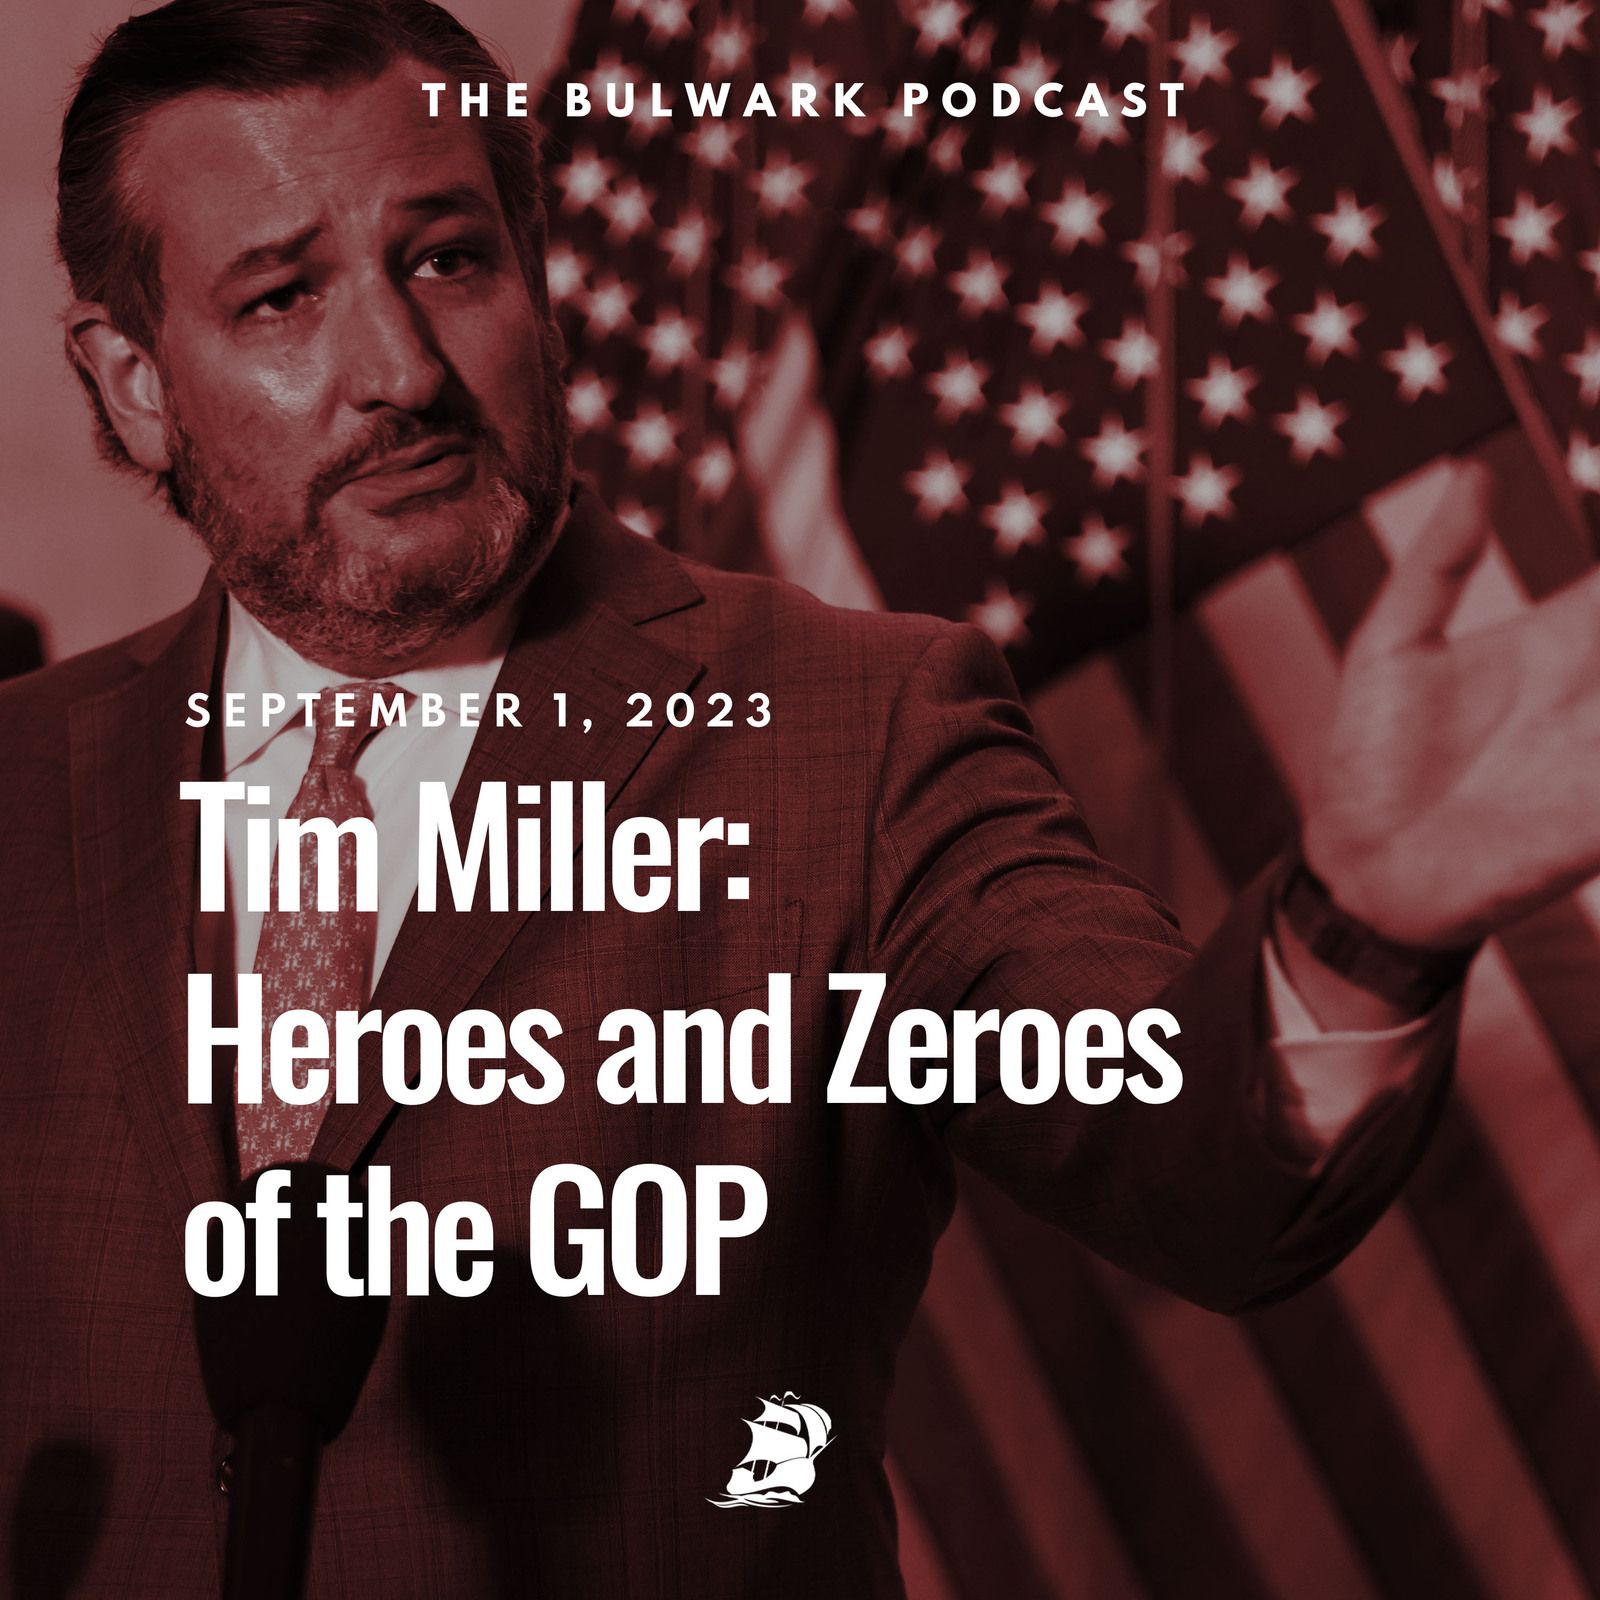 Tim Miller: Heroes and Zeroes of the GOP by The Bulwark Podcast